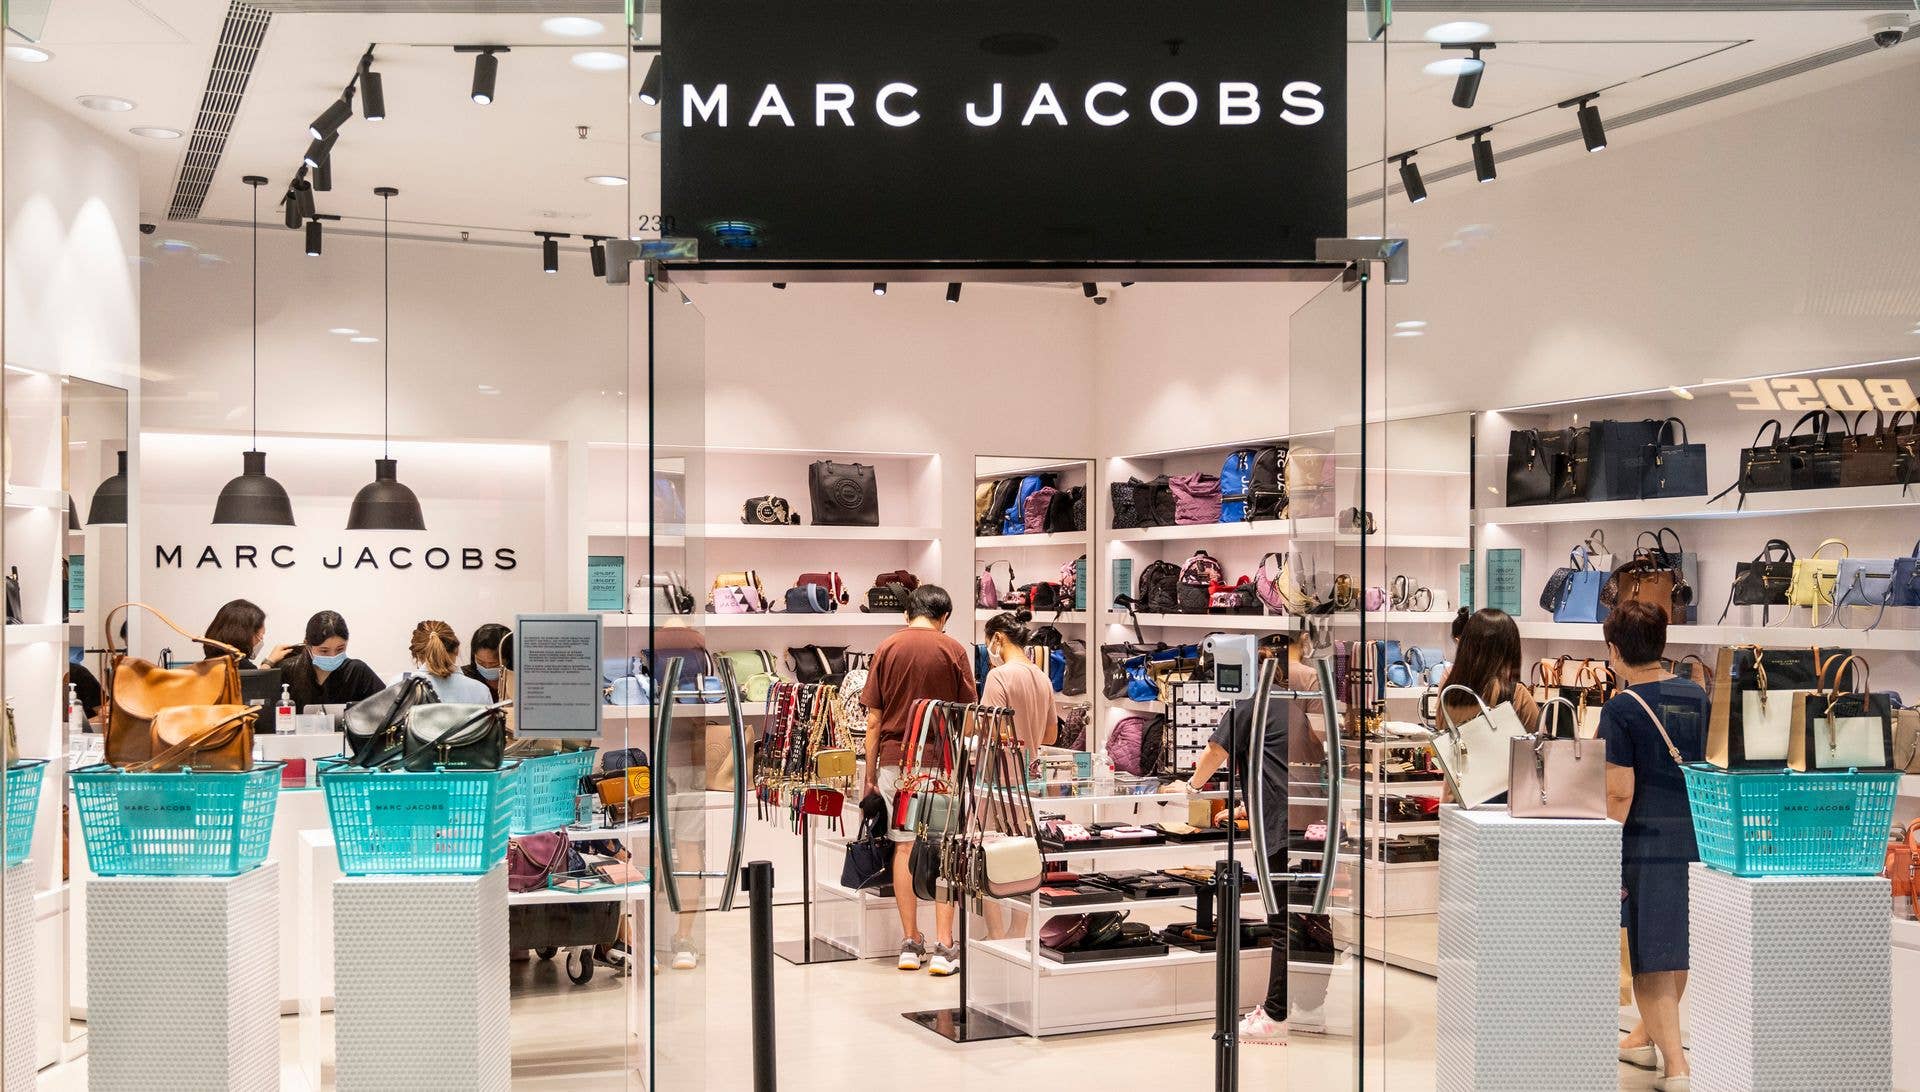 The Marc Jacobs store in Hong Kong